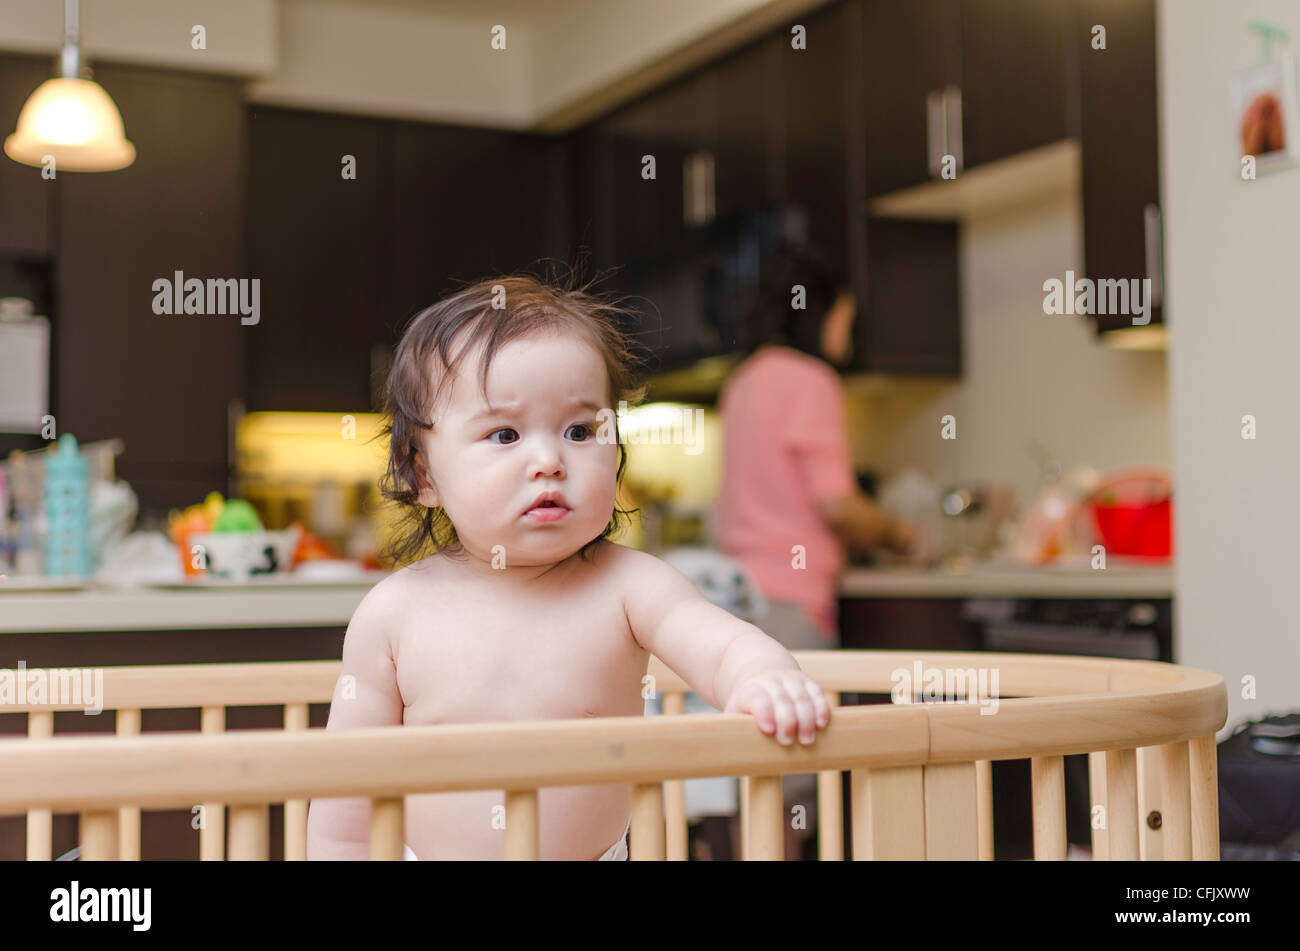 Cute baby girl in a crib. Mixed ethnicity (Asian, Caucasian) Stock Photo